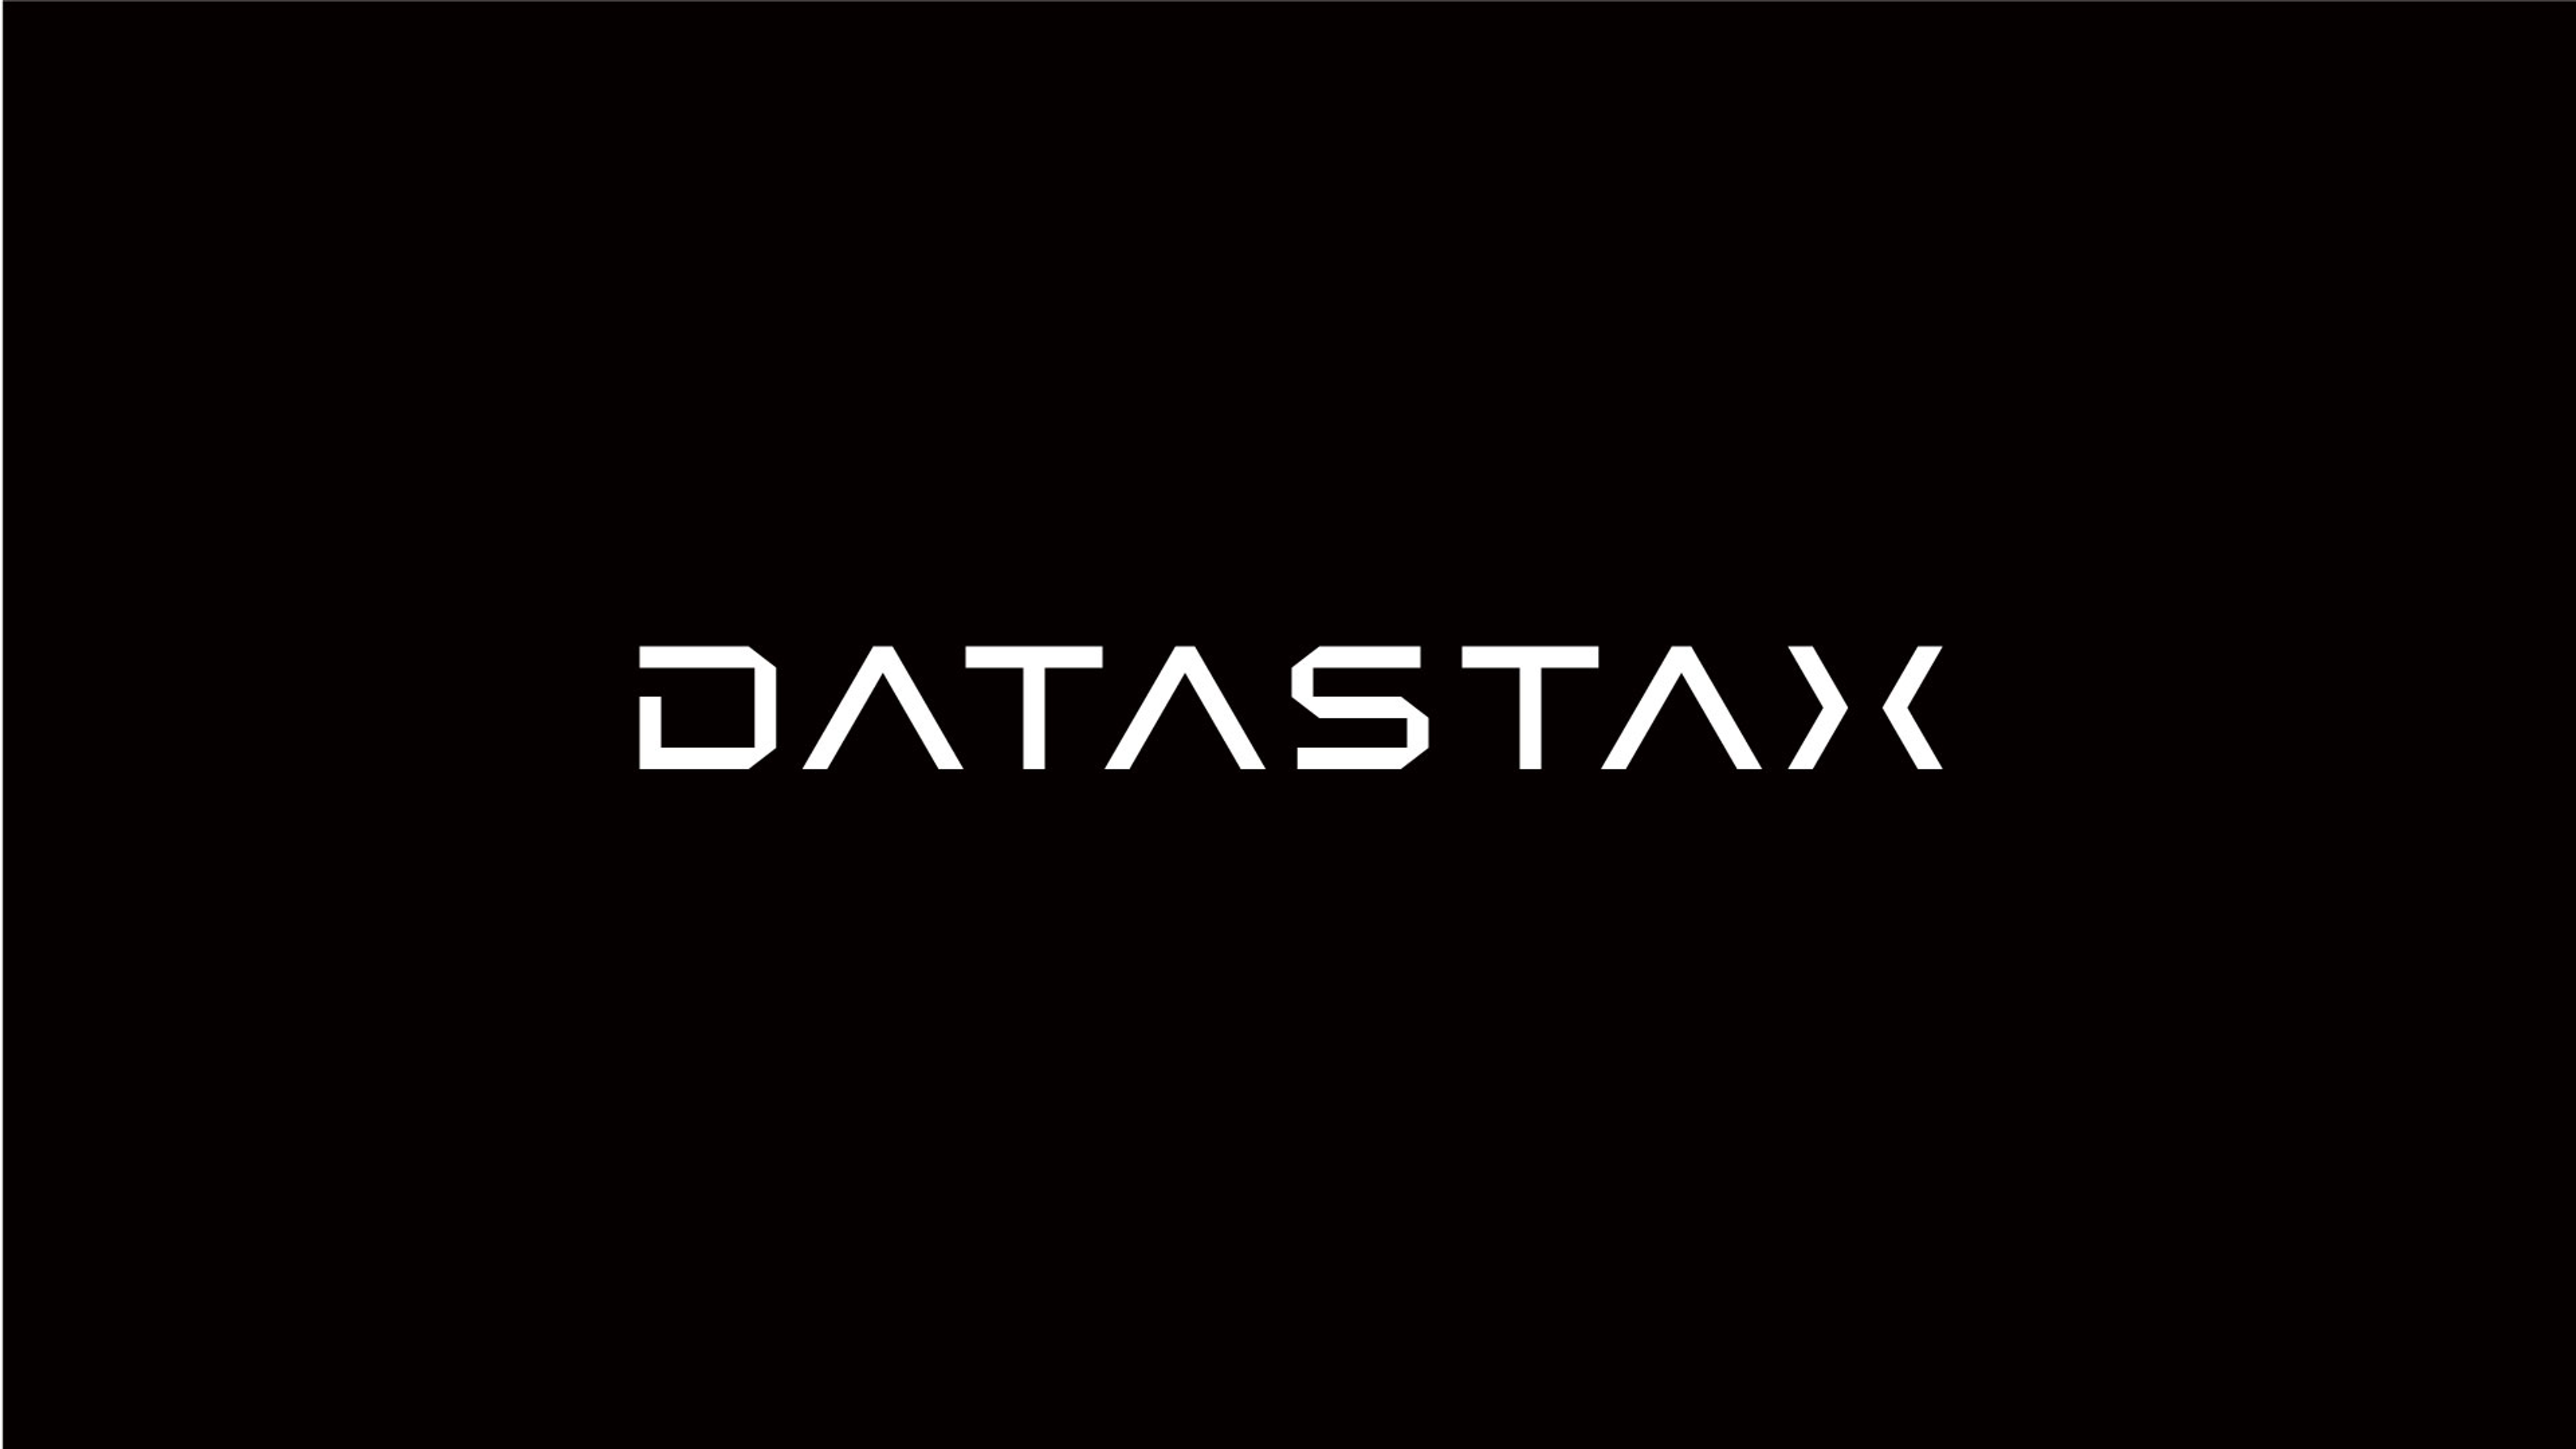 a logo for a company called datatax on a black background .